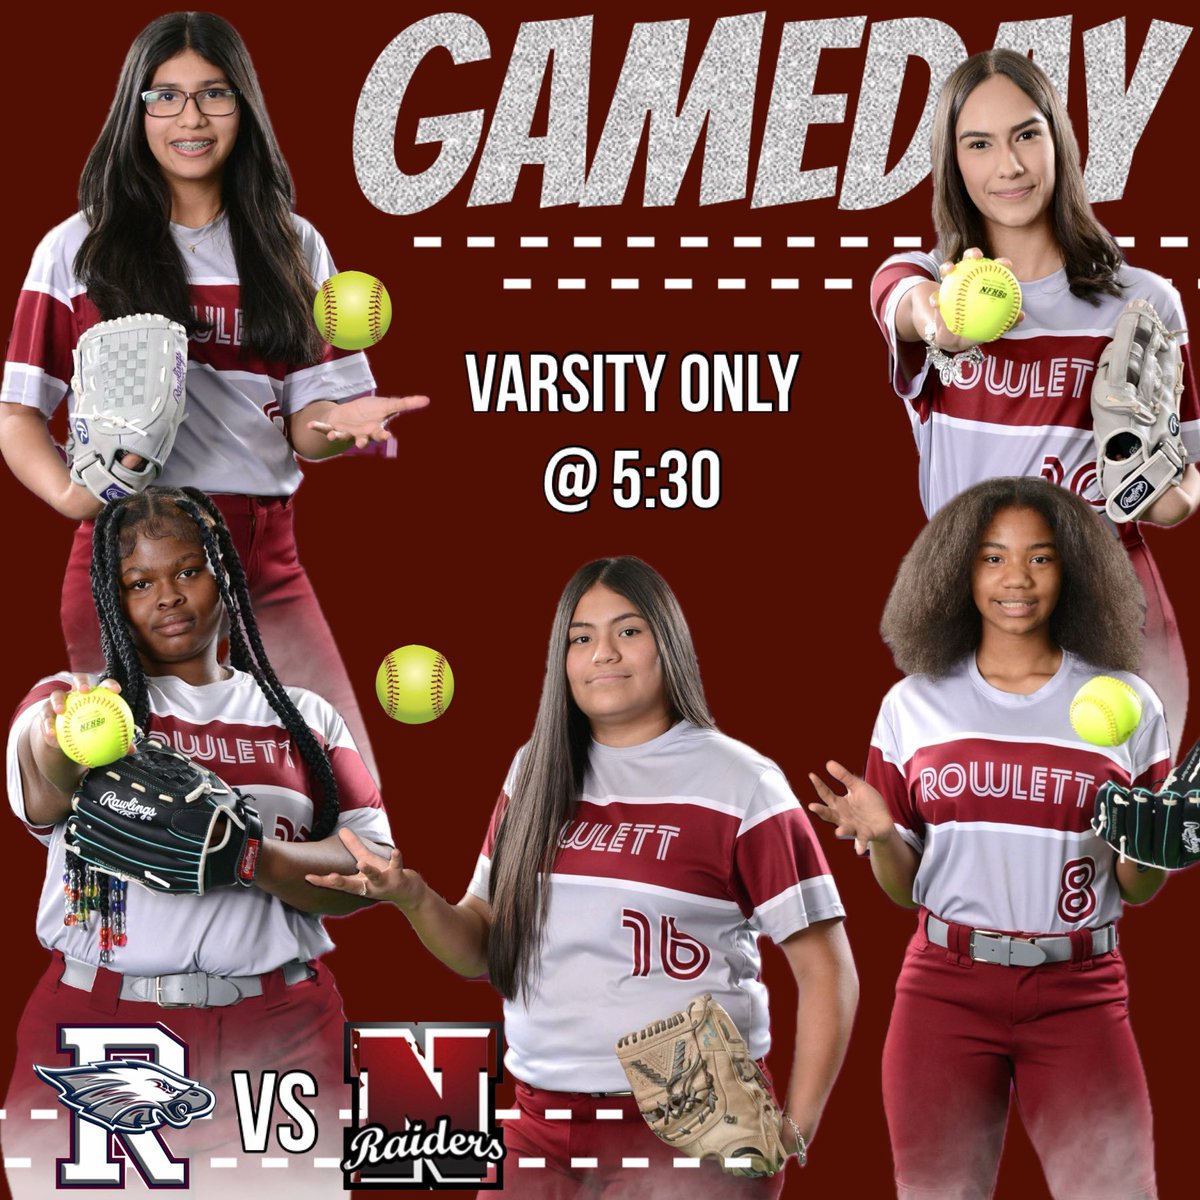 Game change for tonight’s home game ! JV game is canceled, Varsity will now play at 5:30. See you tonight! ❤️🦅🥎